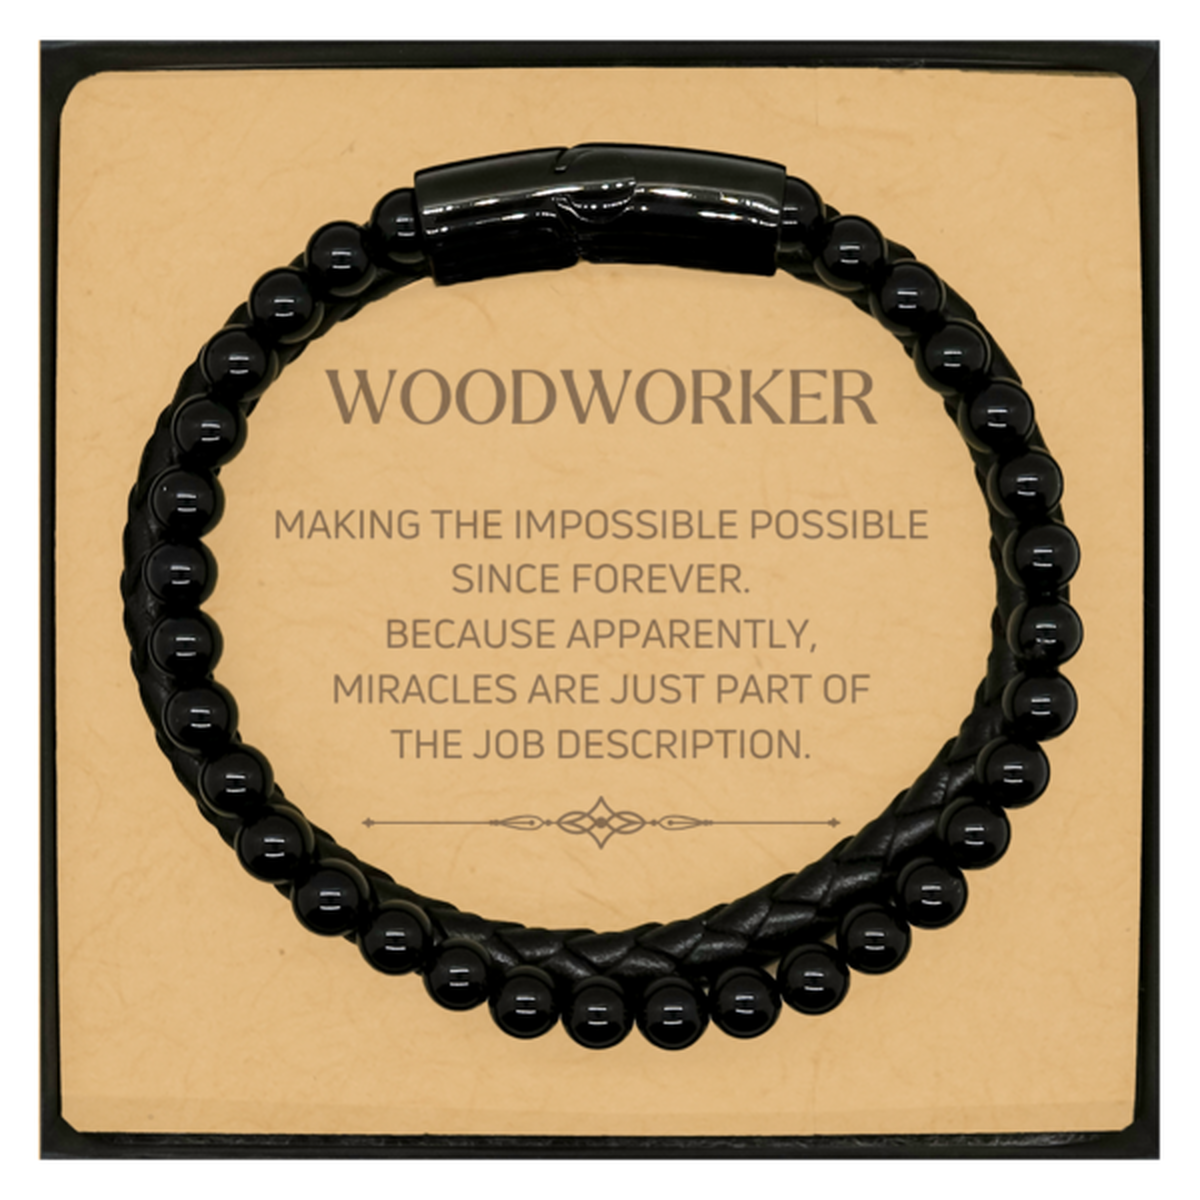 Funny Woodworker Gifts, Miracles are just part of the job description, Inspirational Birthday Christmas Stone Leather Bracelets For Woodworker, Men, Women, Coworkers, Friends, Boss